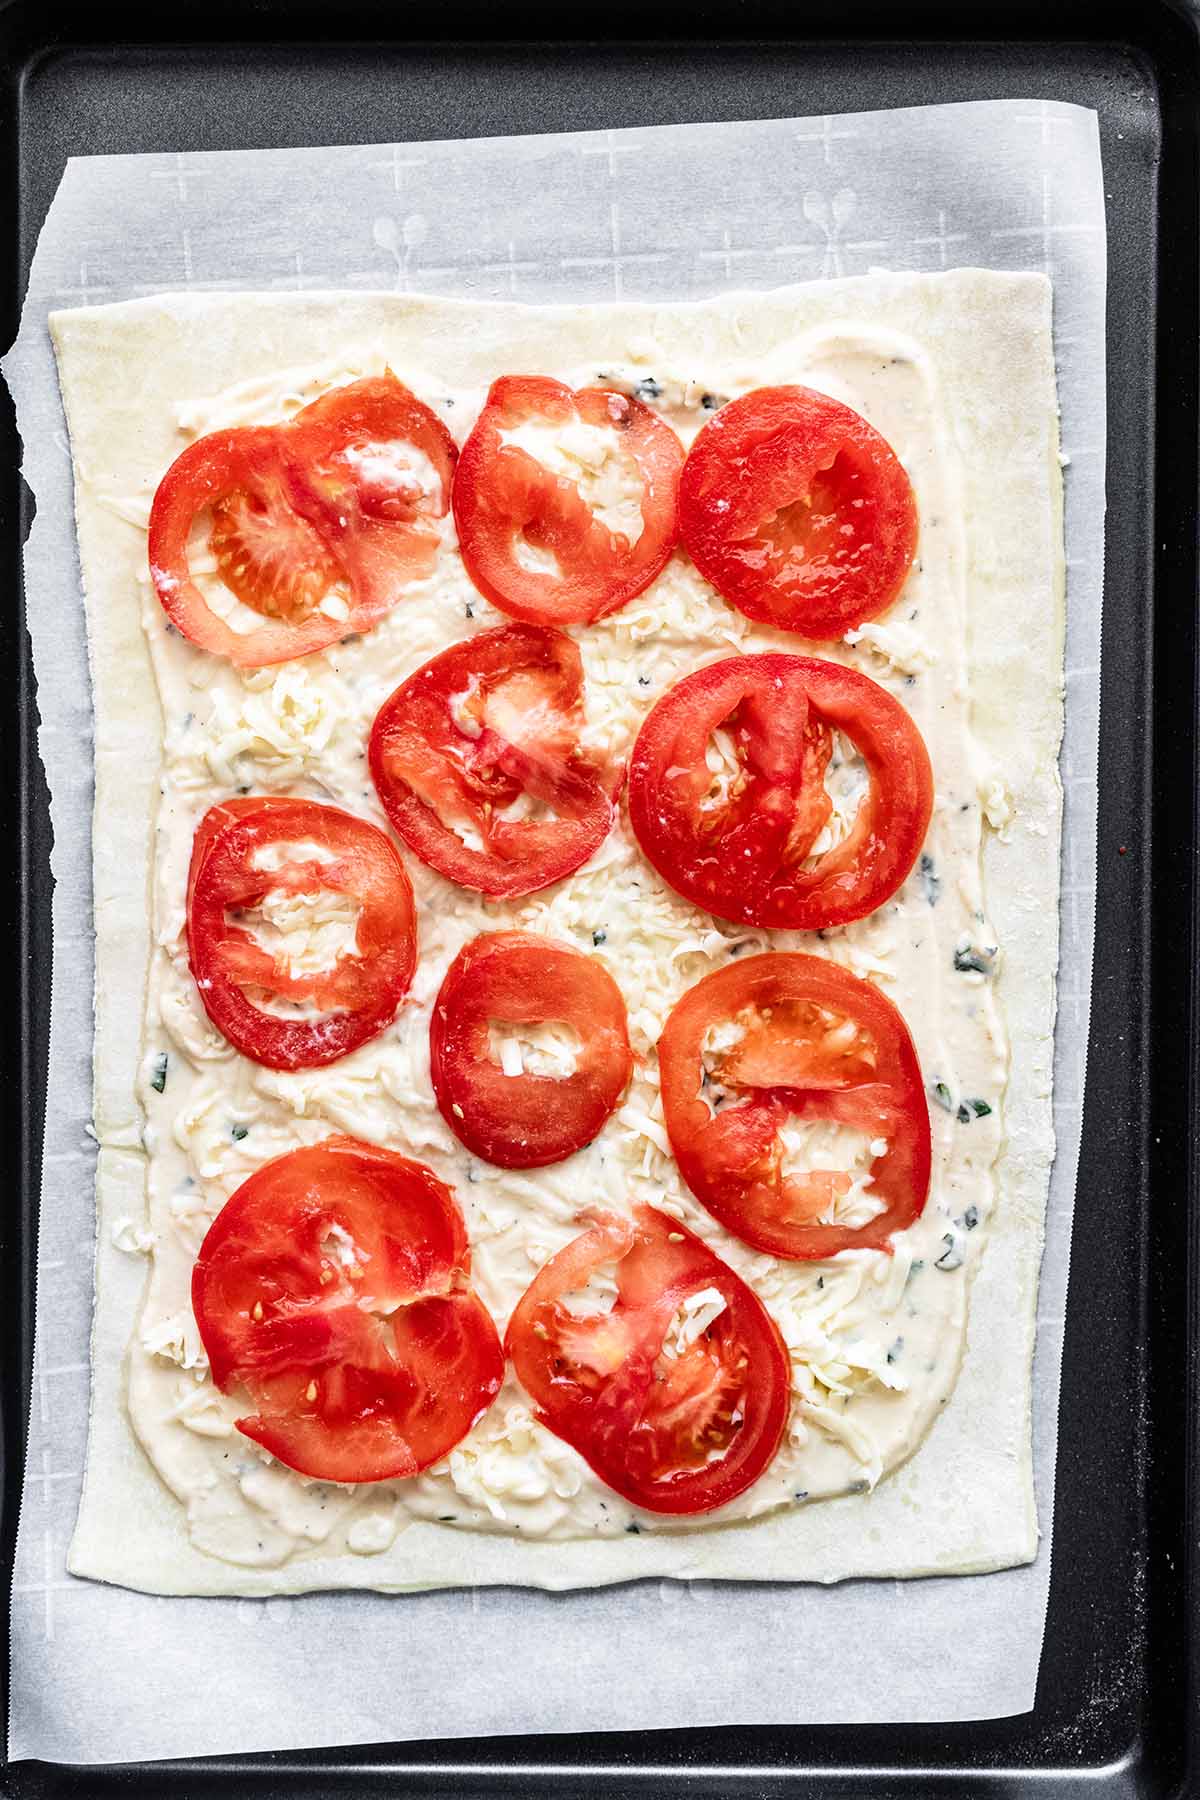 Tomato slices spread over the top of cheese.